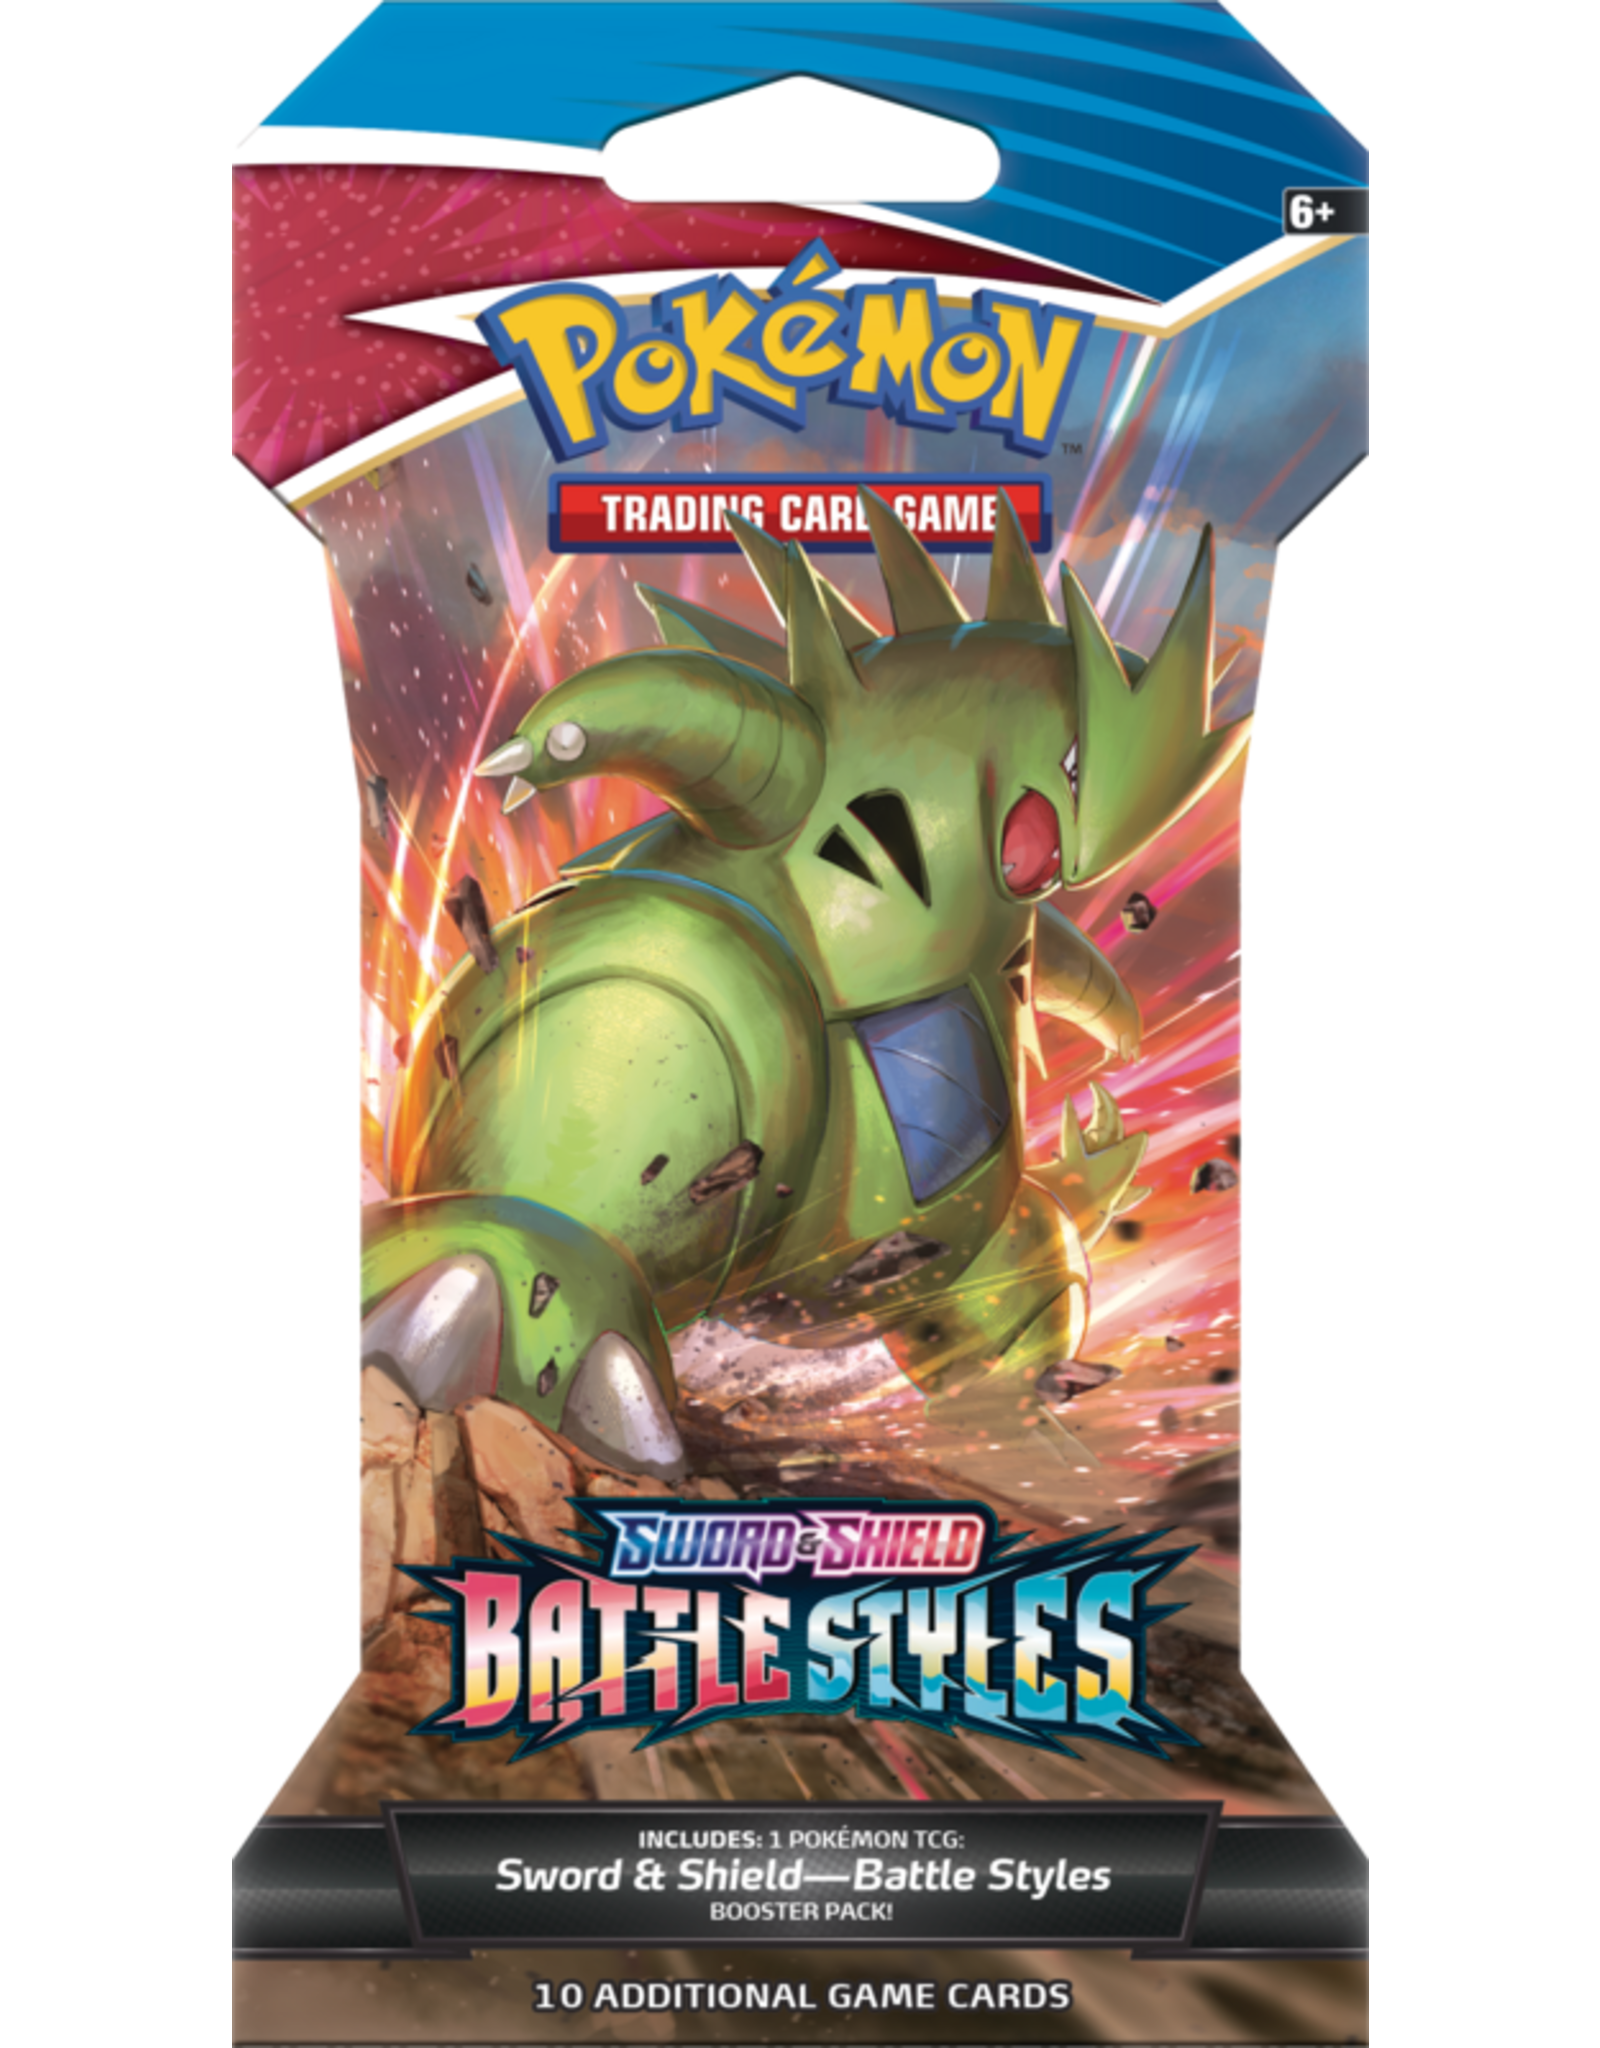 The Pokemon Company Pokémon Trading Card Game - Sword and Shield Battlestyles Booster Pack (10 cards)